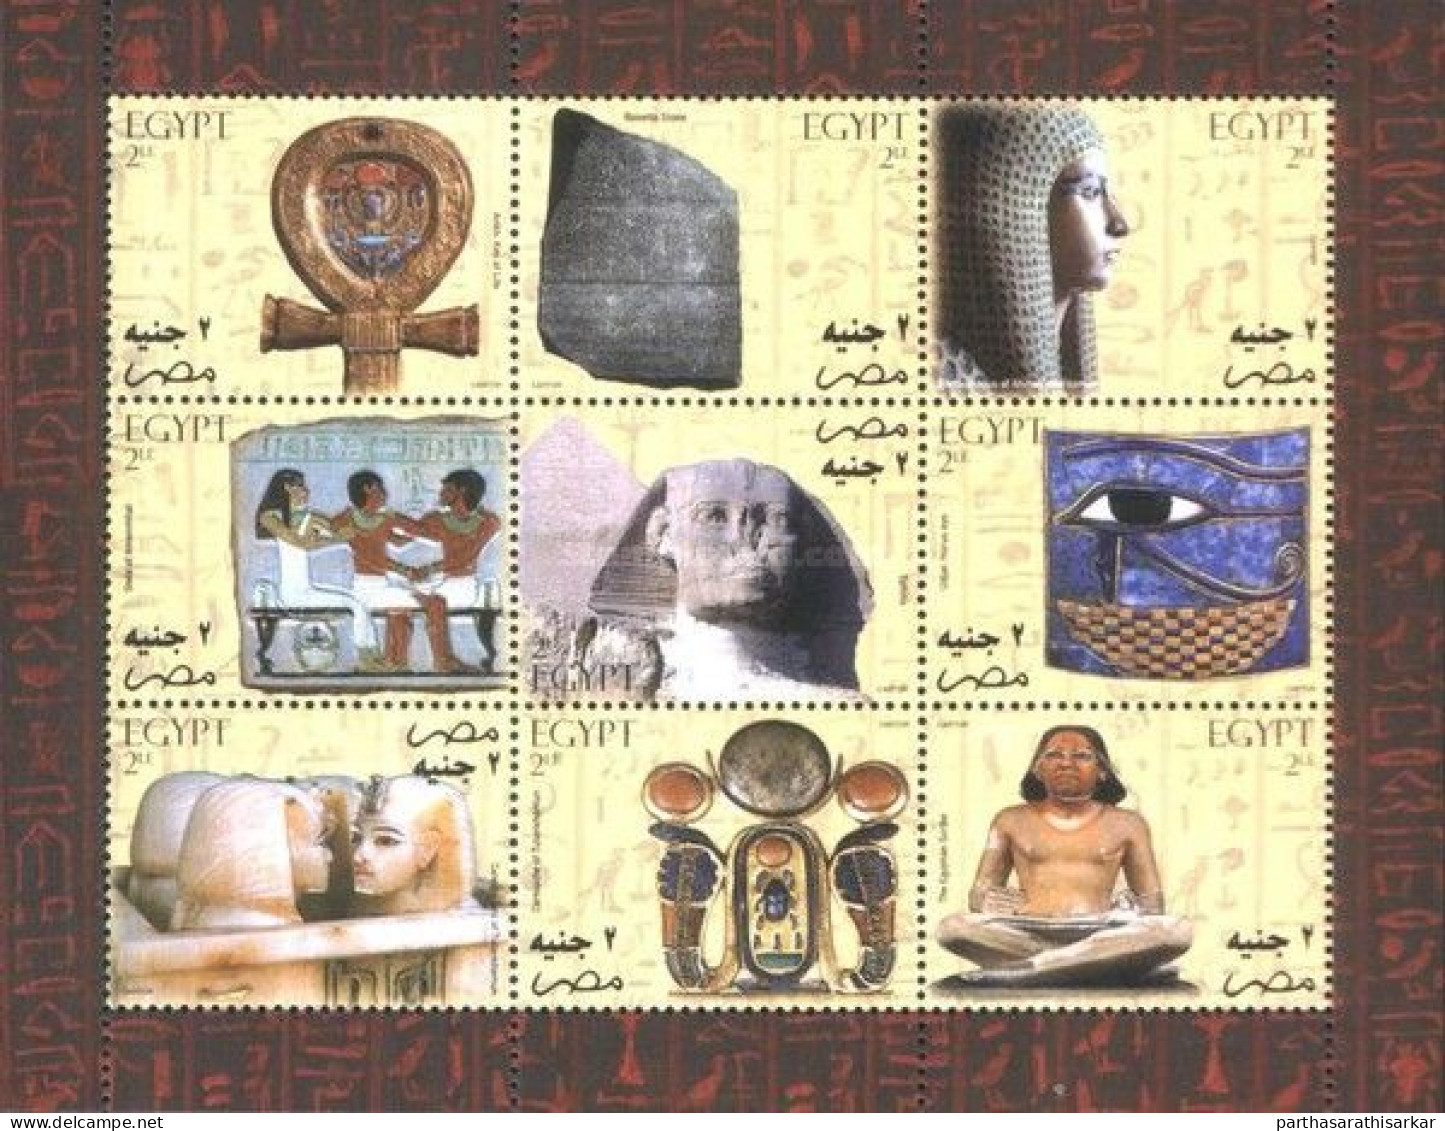 EGYPT 2004 DISCOVER THE TREASURES OF EGYPT IN STAMPS GOLD FOIL STAMP BOOKLET UNUSUAL RARE MNH - Nuovi